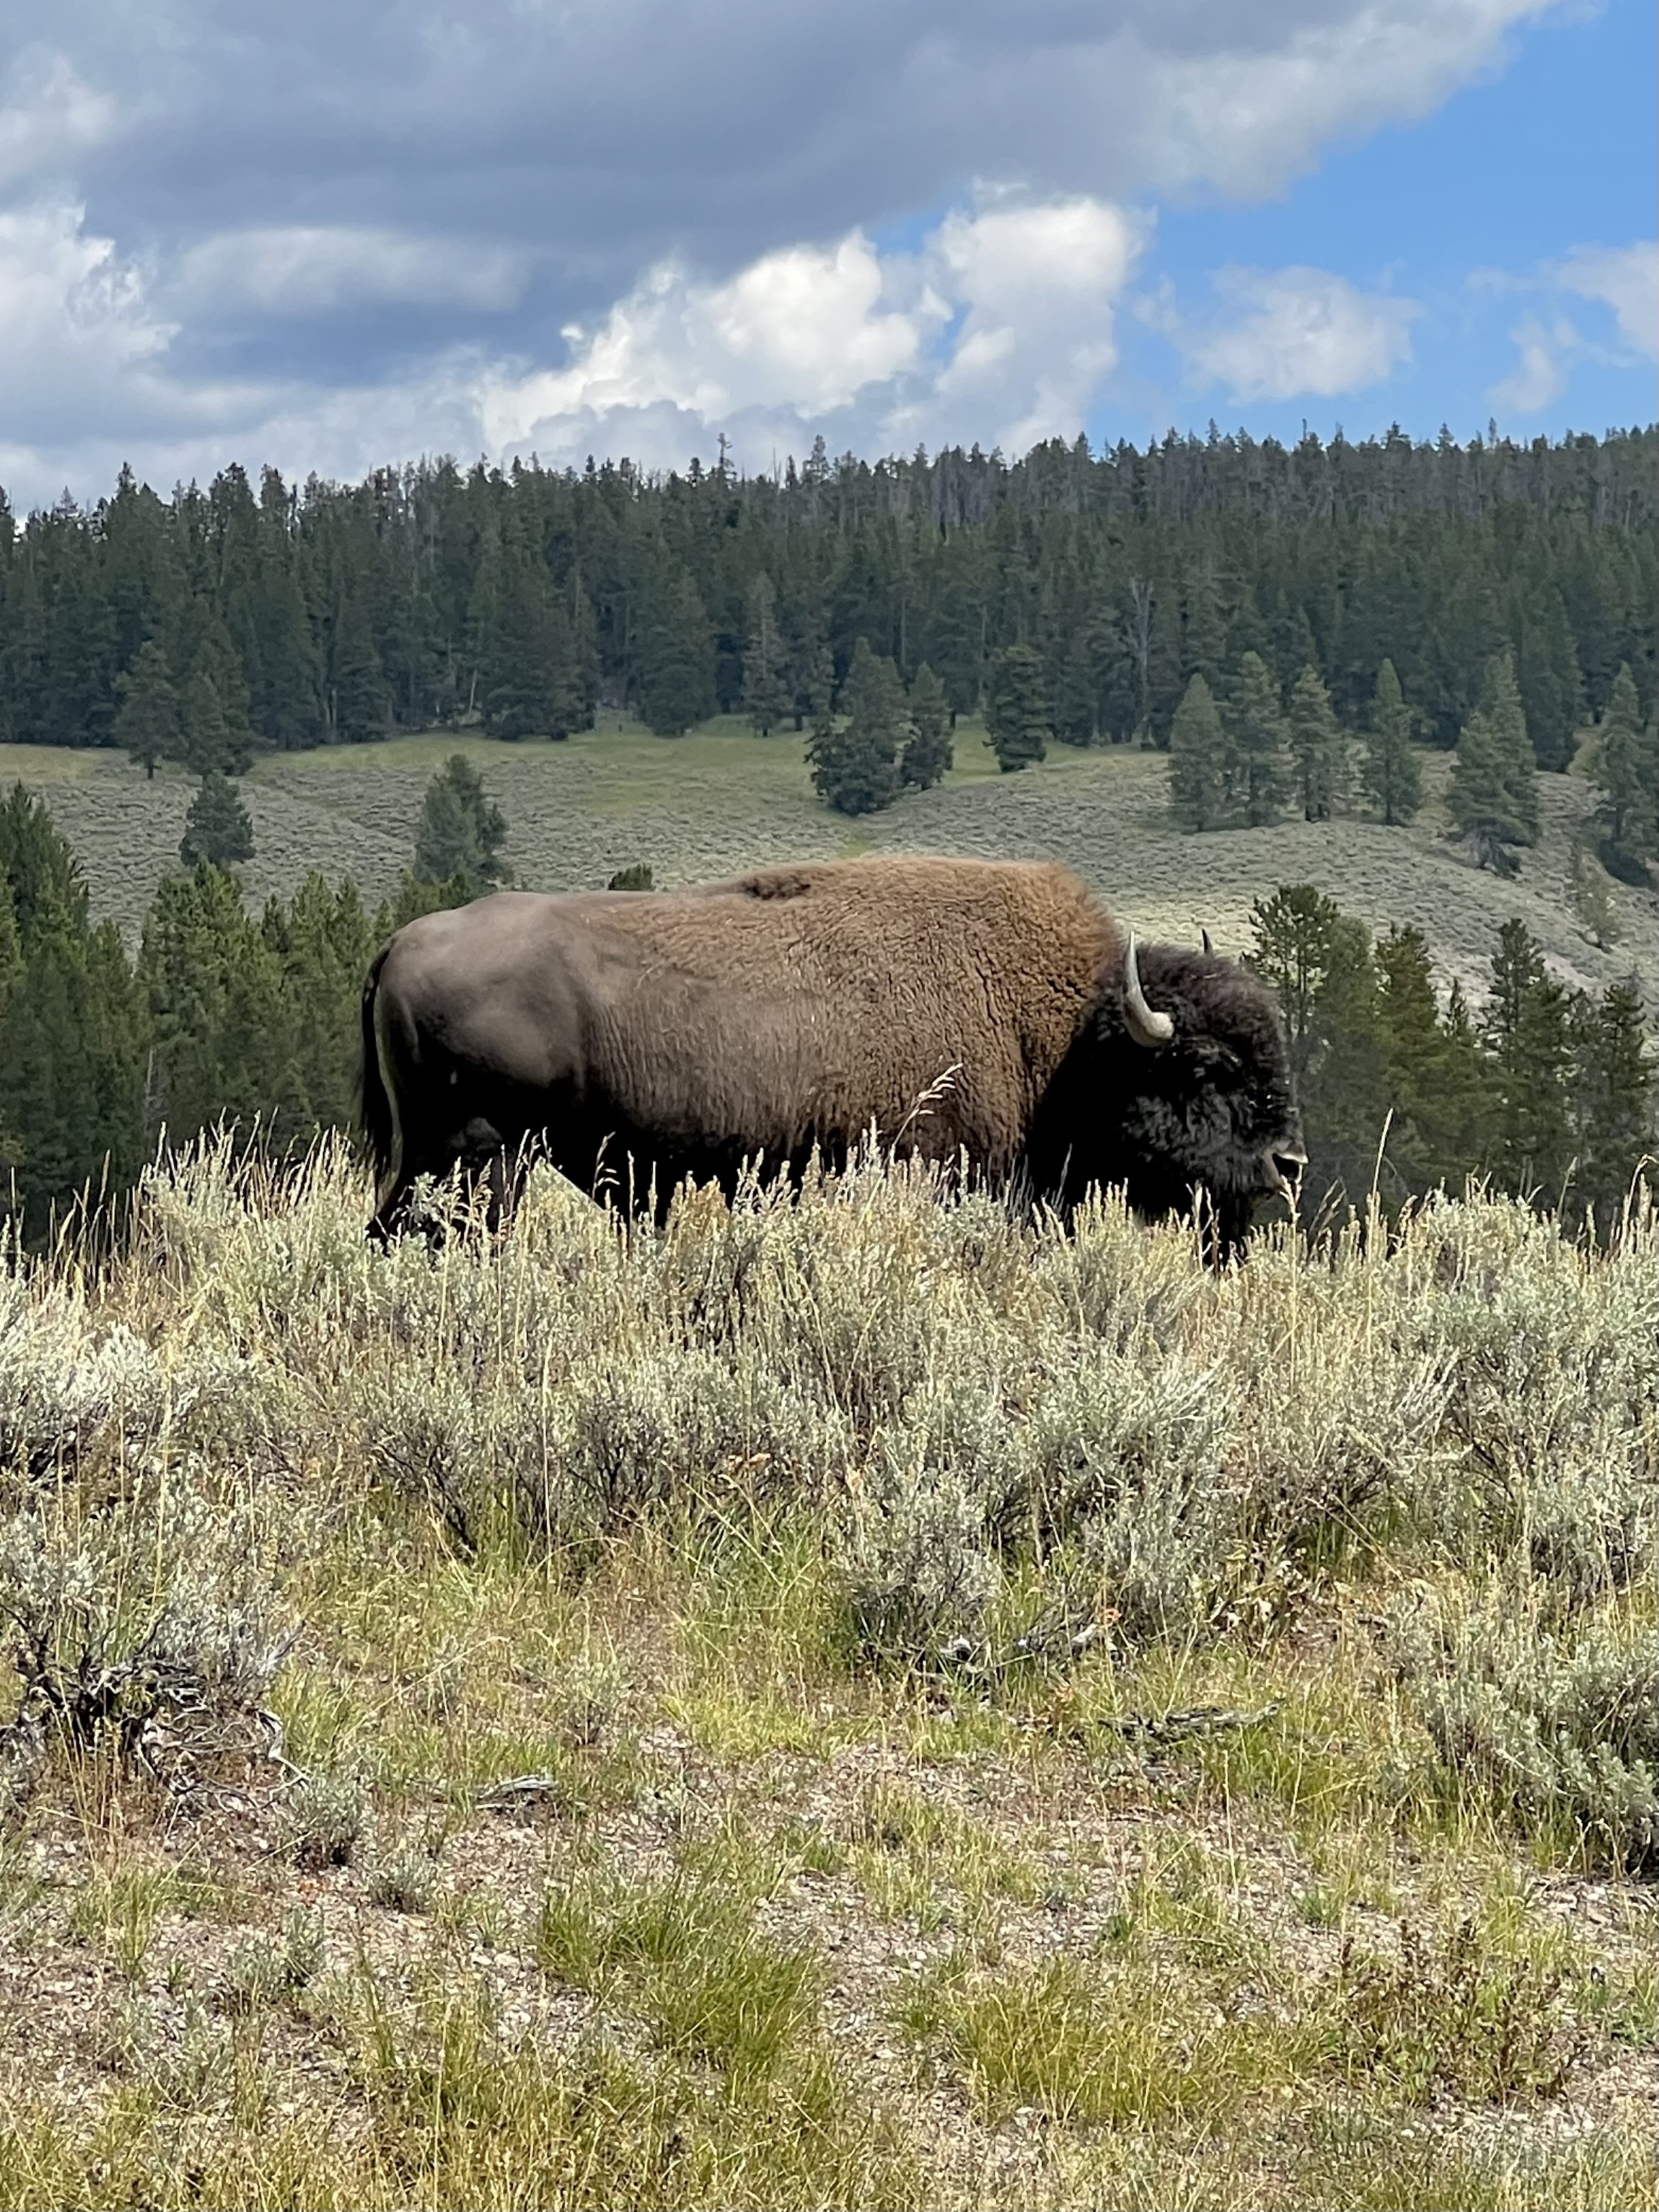 bison in yellowstone national park
